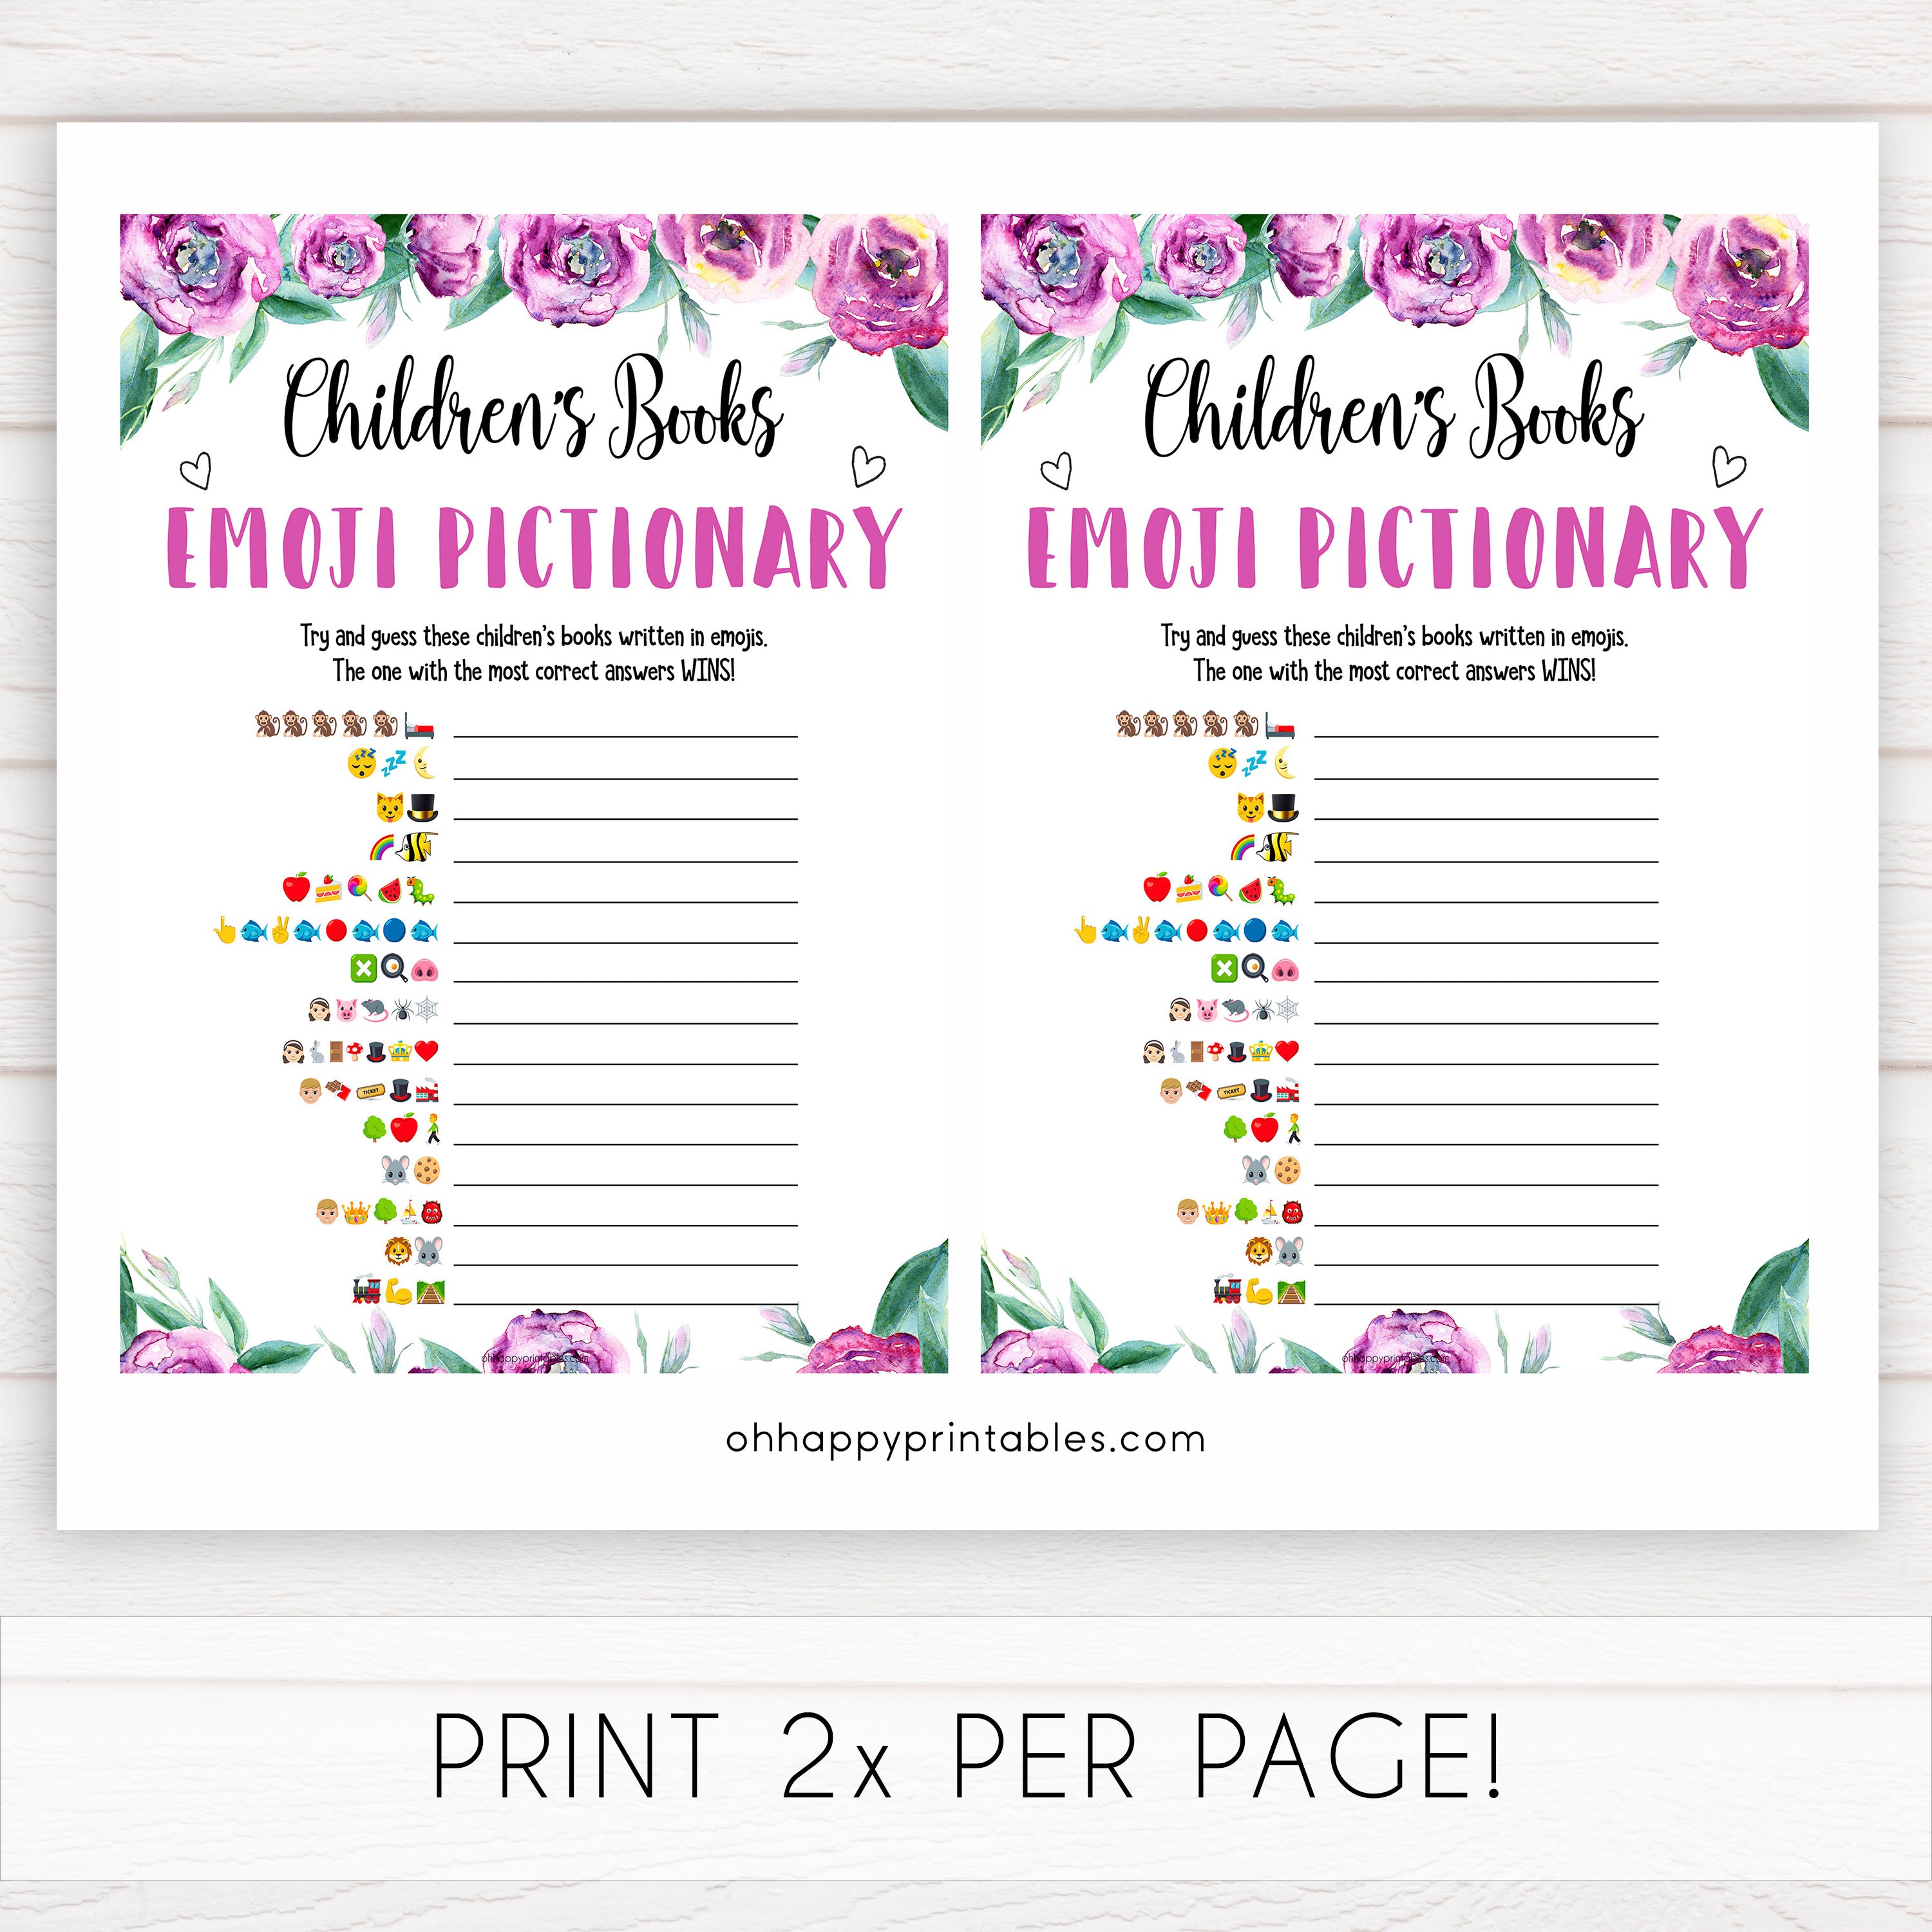 Purple peonies childrens books emoji pictionary baby shower games, printable baby shower games, fun baby shower games, baby shower games, popular baby shower games, floral baby shower games, purple baby shower themes